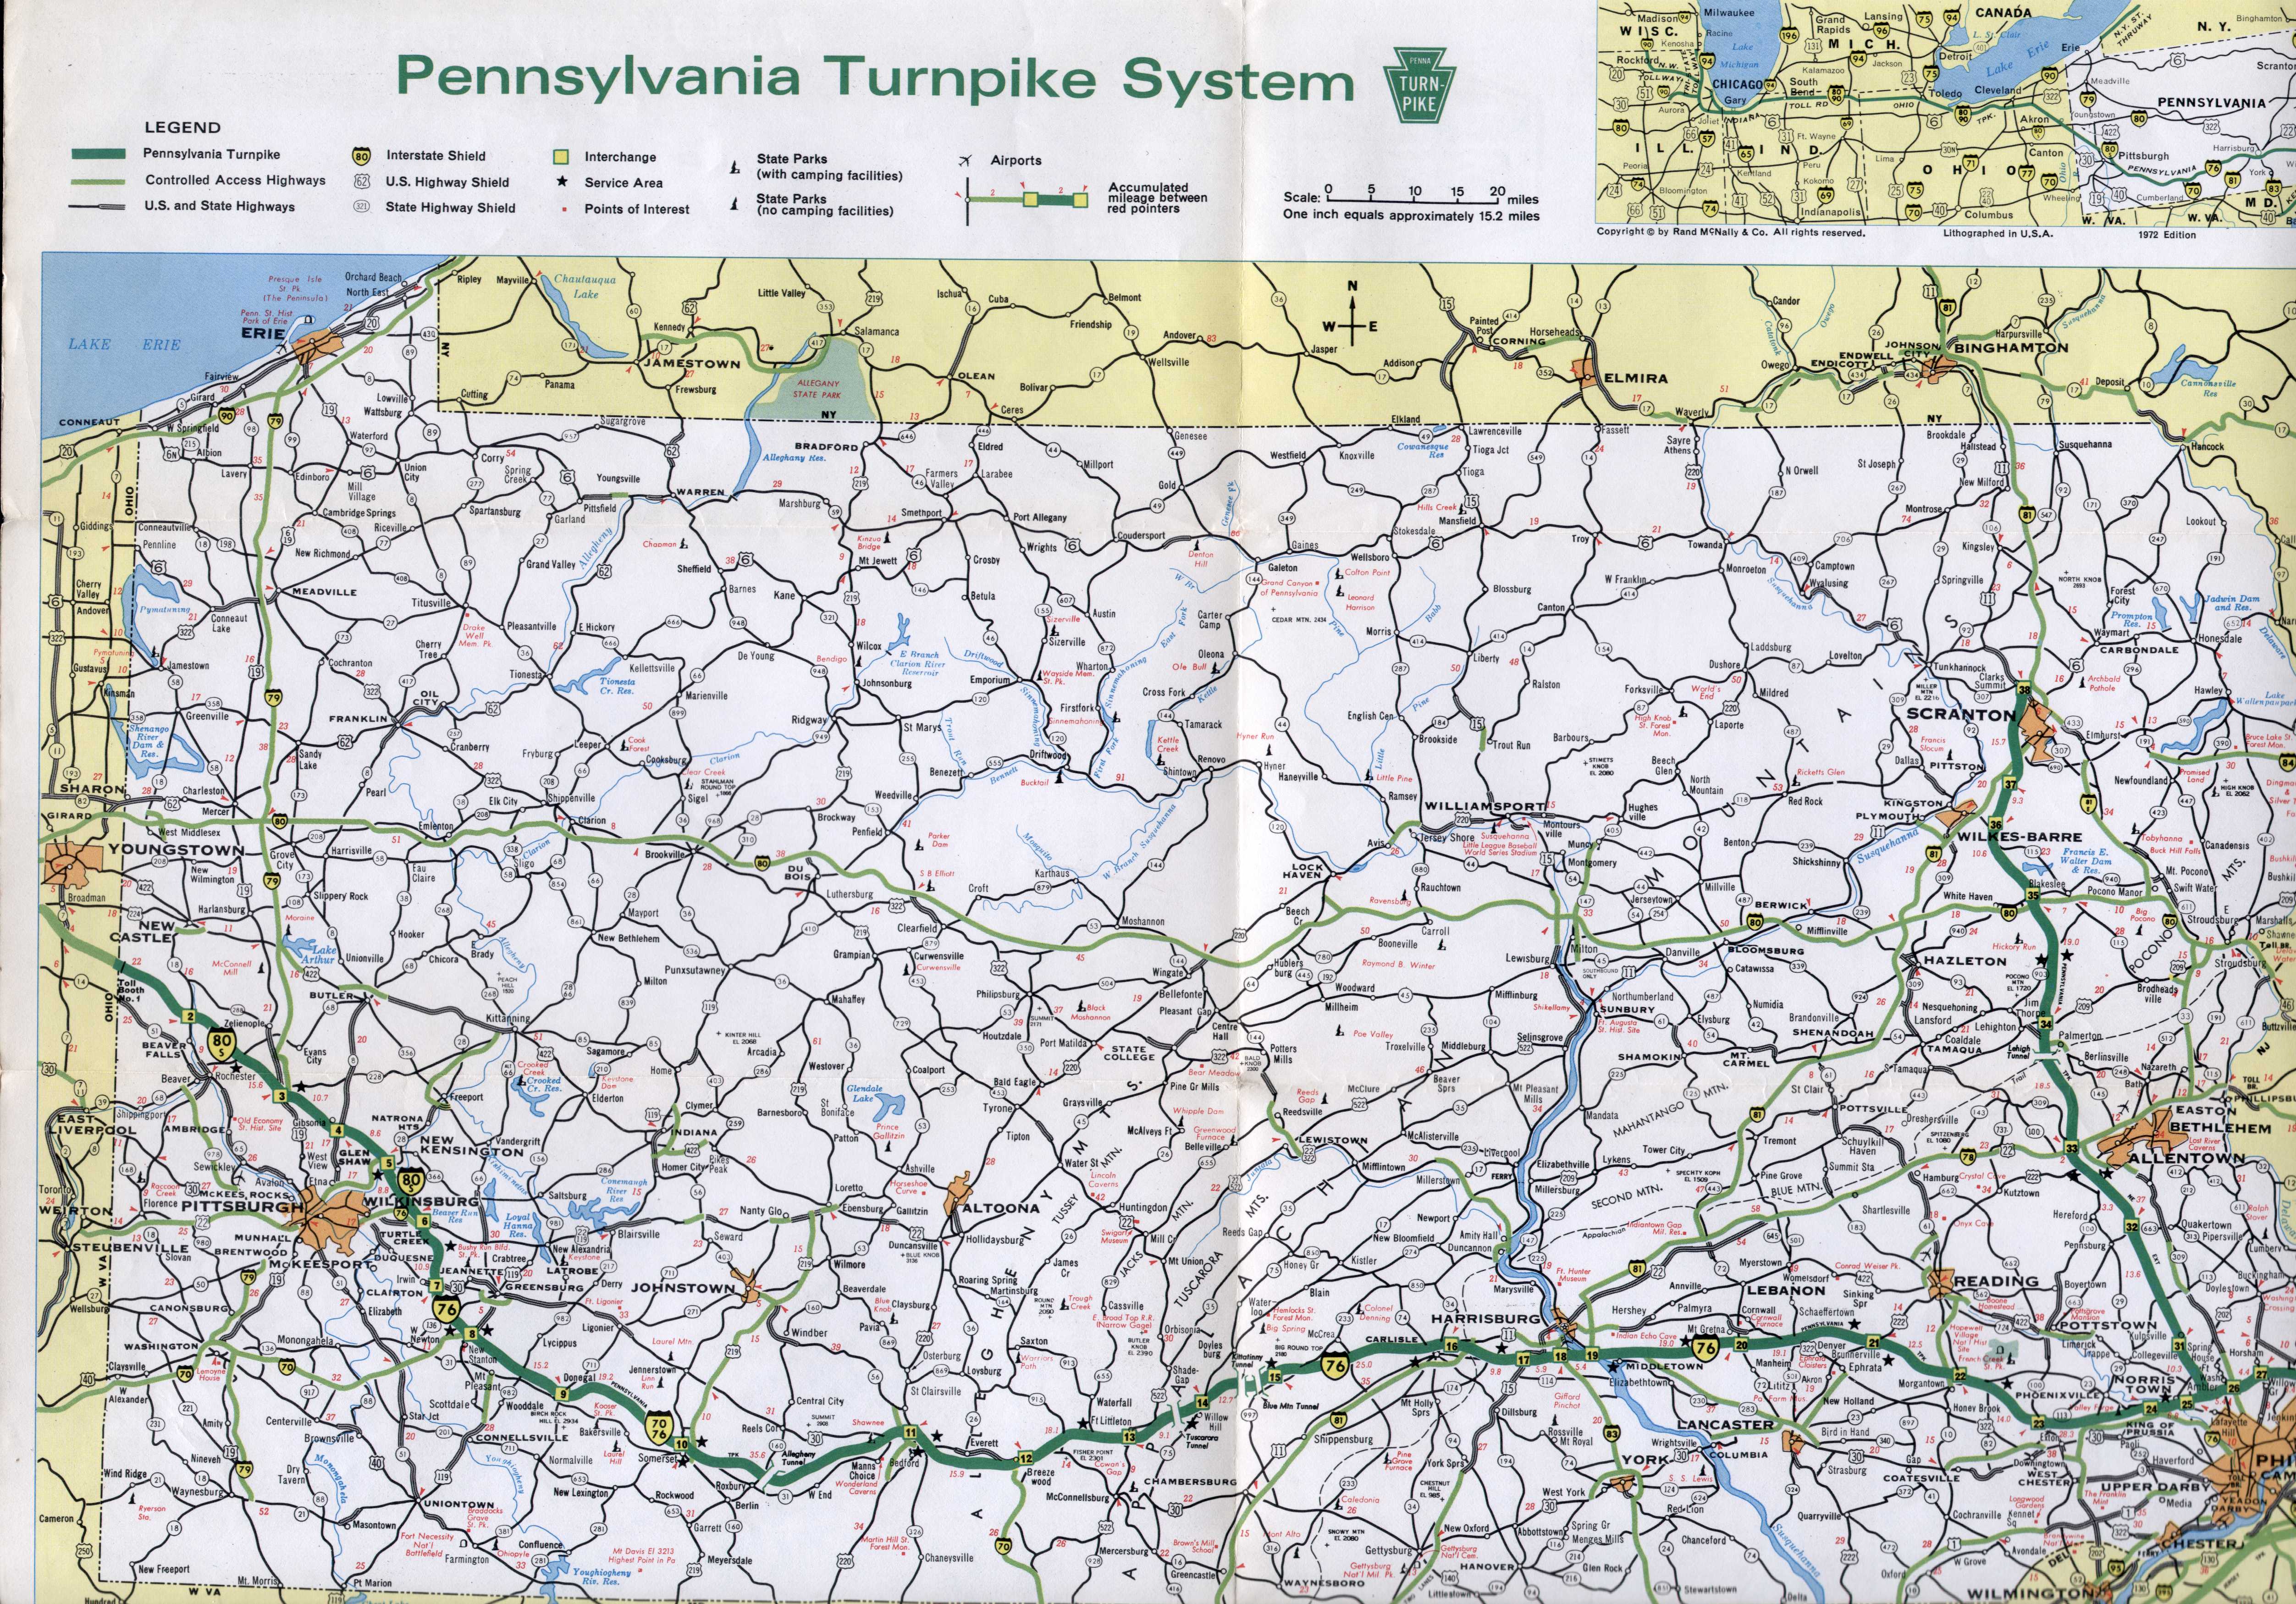 1970s Pennsylvania State Road Maps